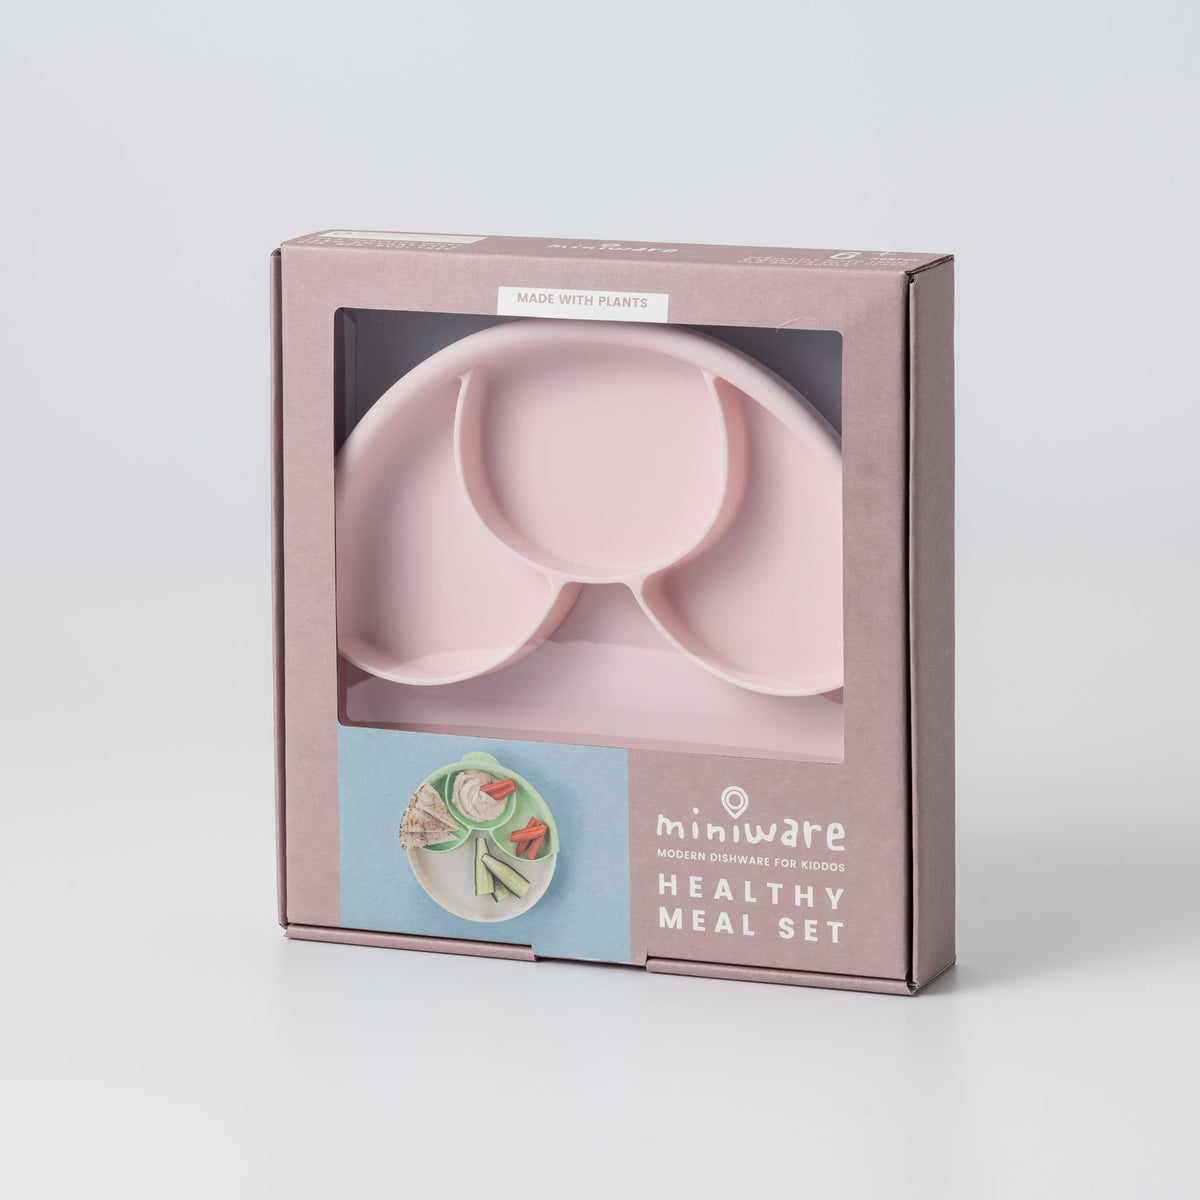 Miniware Healthy Meal Set - PLA Smart Divider Suction Plate + Silicone Divider in Cotton Candy